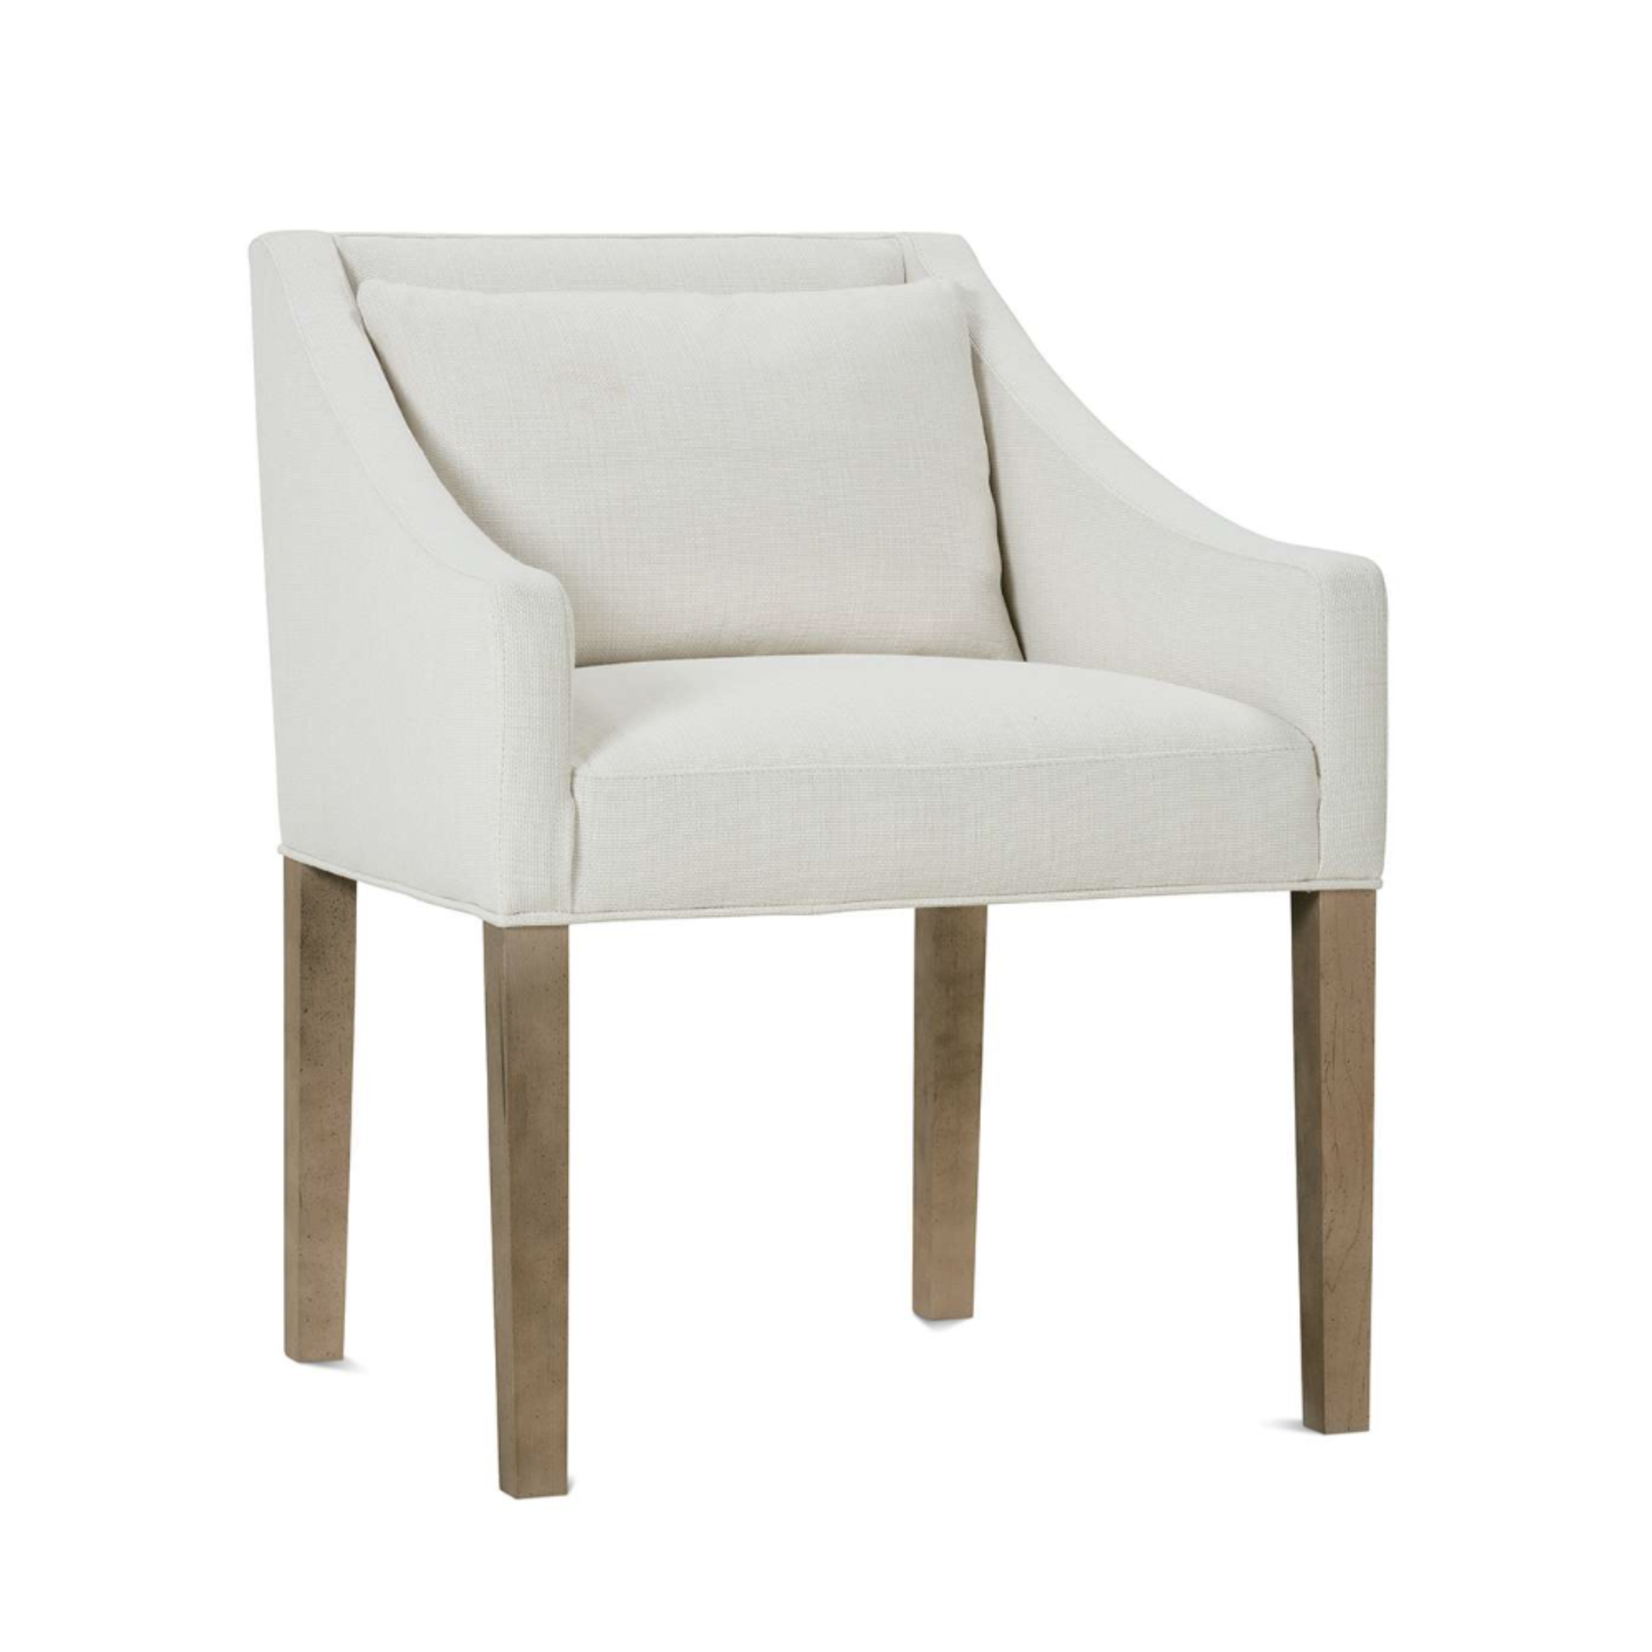 Outside The Box Odessa Chalk White Kid Proof Upholstered Performance Fabric Arm Dining Chair 1094